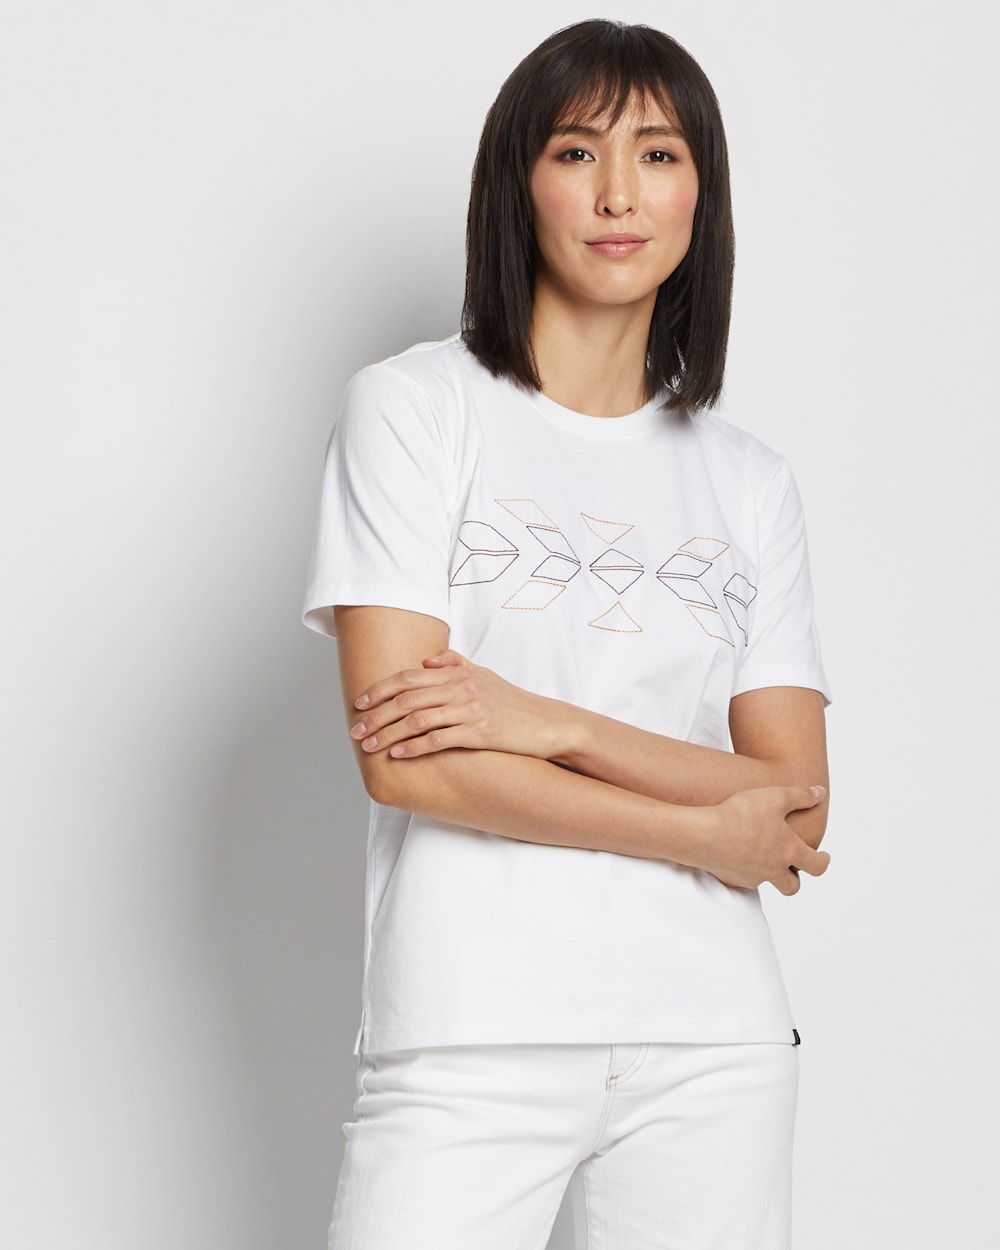 ALTERNATE VIEW OF WOMEN'S DESCHUTES EMBROIDERED TEE IN WHITE image number 4